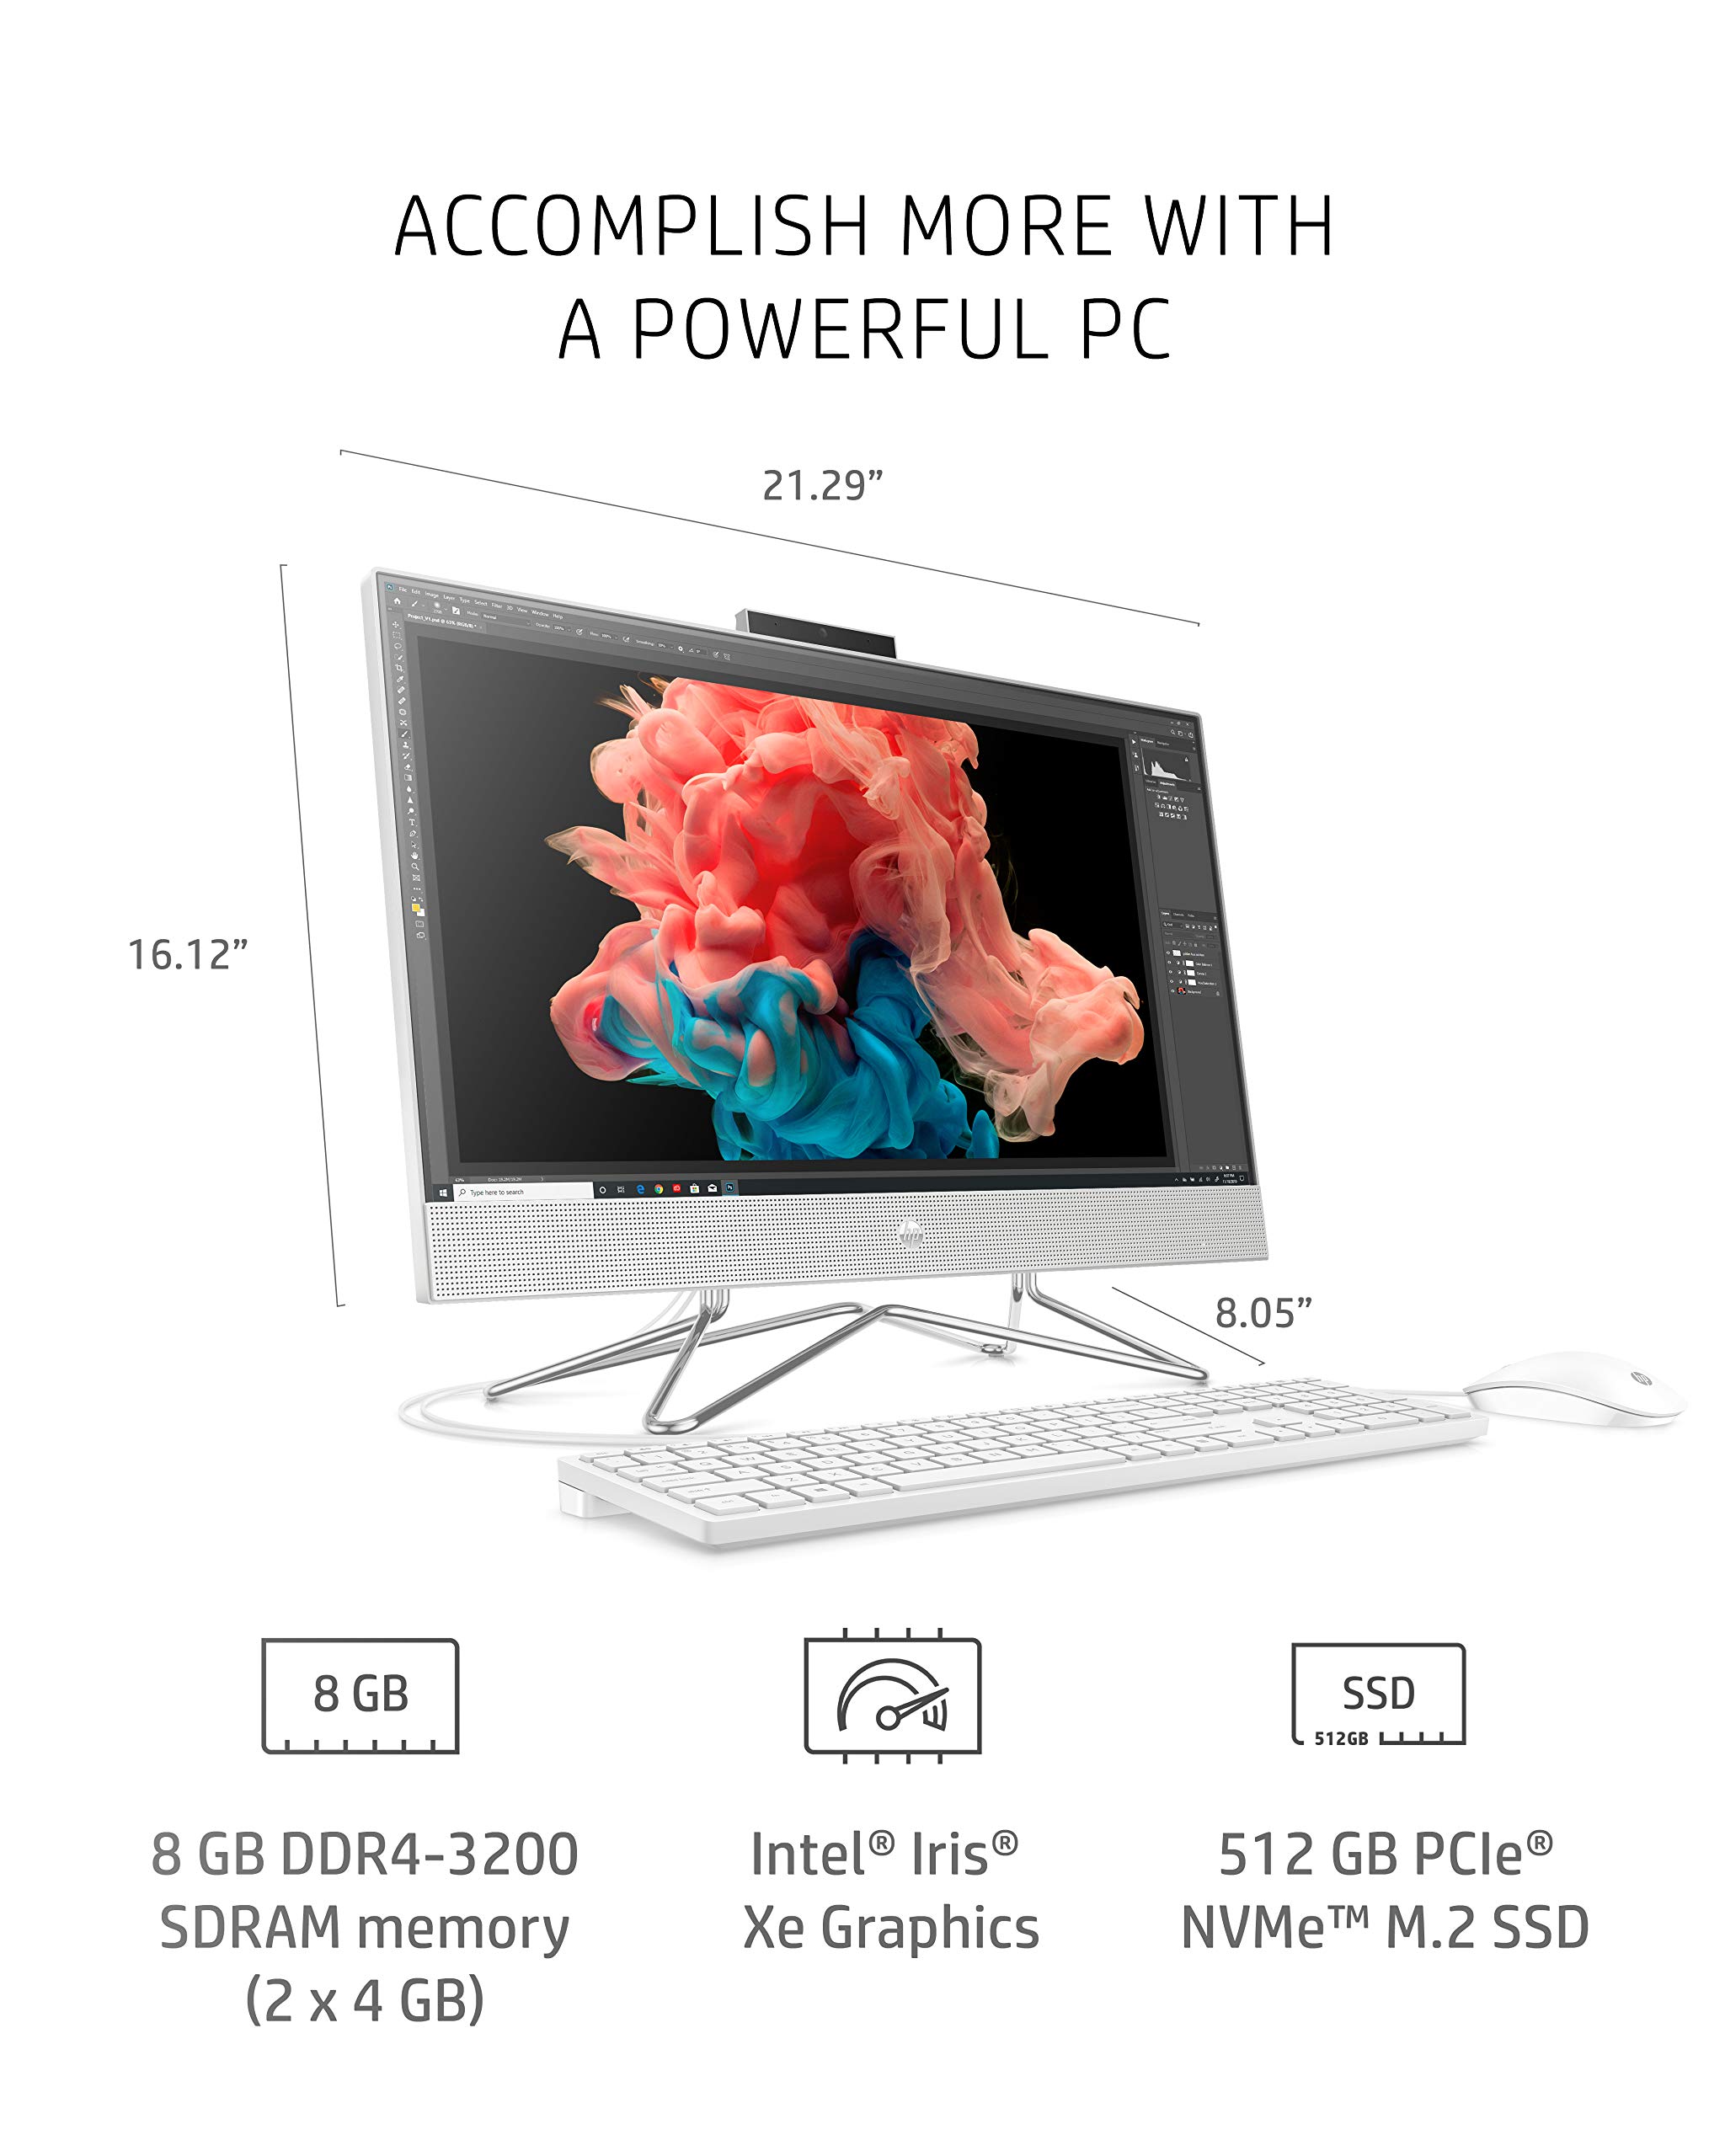 HP All-in-One Desktop PC, 11th Gen Intel Core i5-1135G7 Processor, 8 GB RAM, 512 GB SSD Storage, Full HD 23.8” Touchscreen, Windows 10 Home, Remote Work Ready, Mouse and Keyboard (24-df1270, 2021)